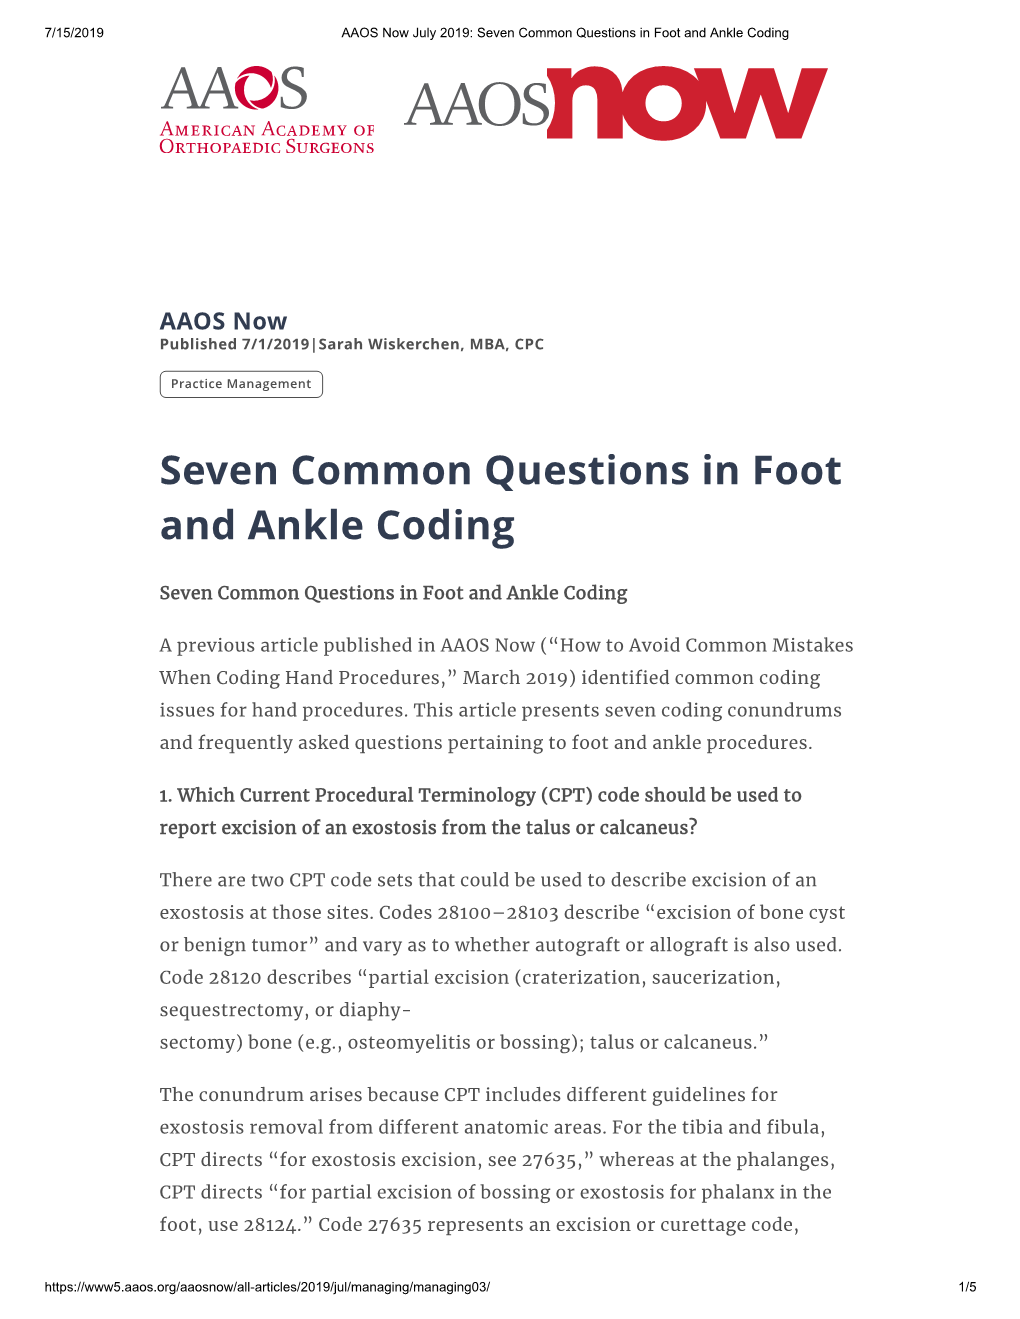 Seven Common Questions in Foot and Ankle Coding